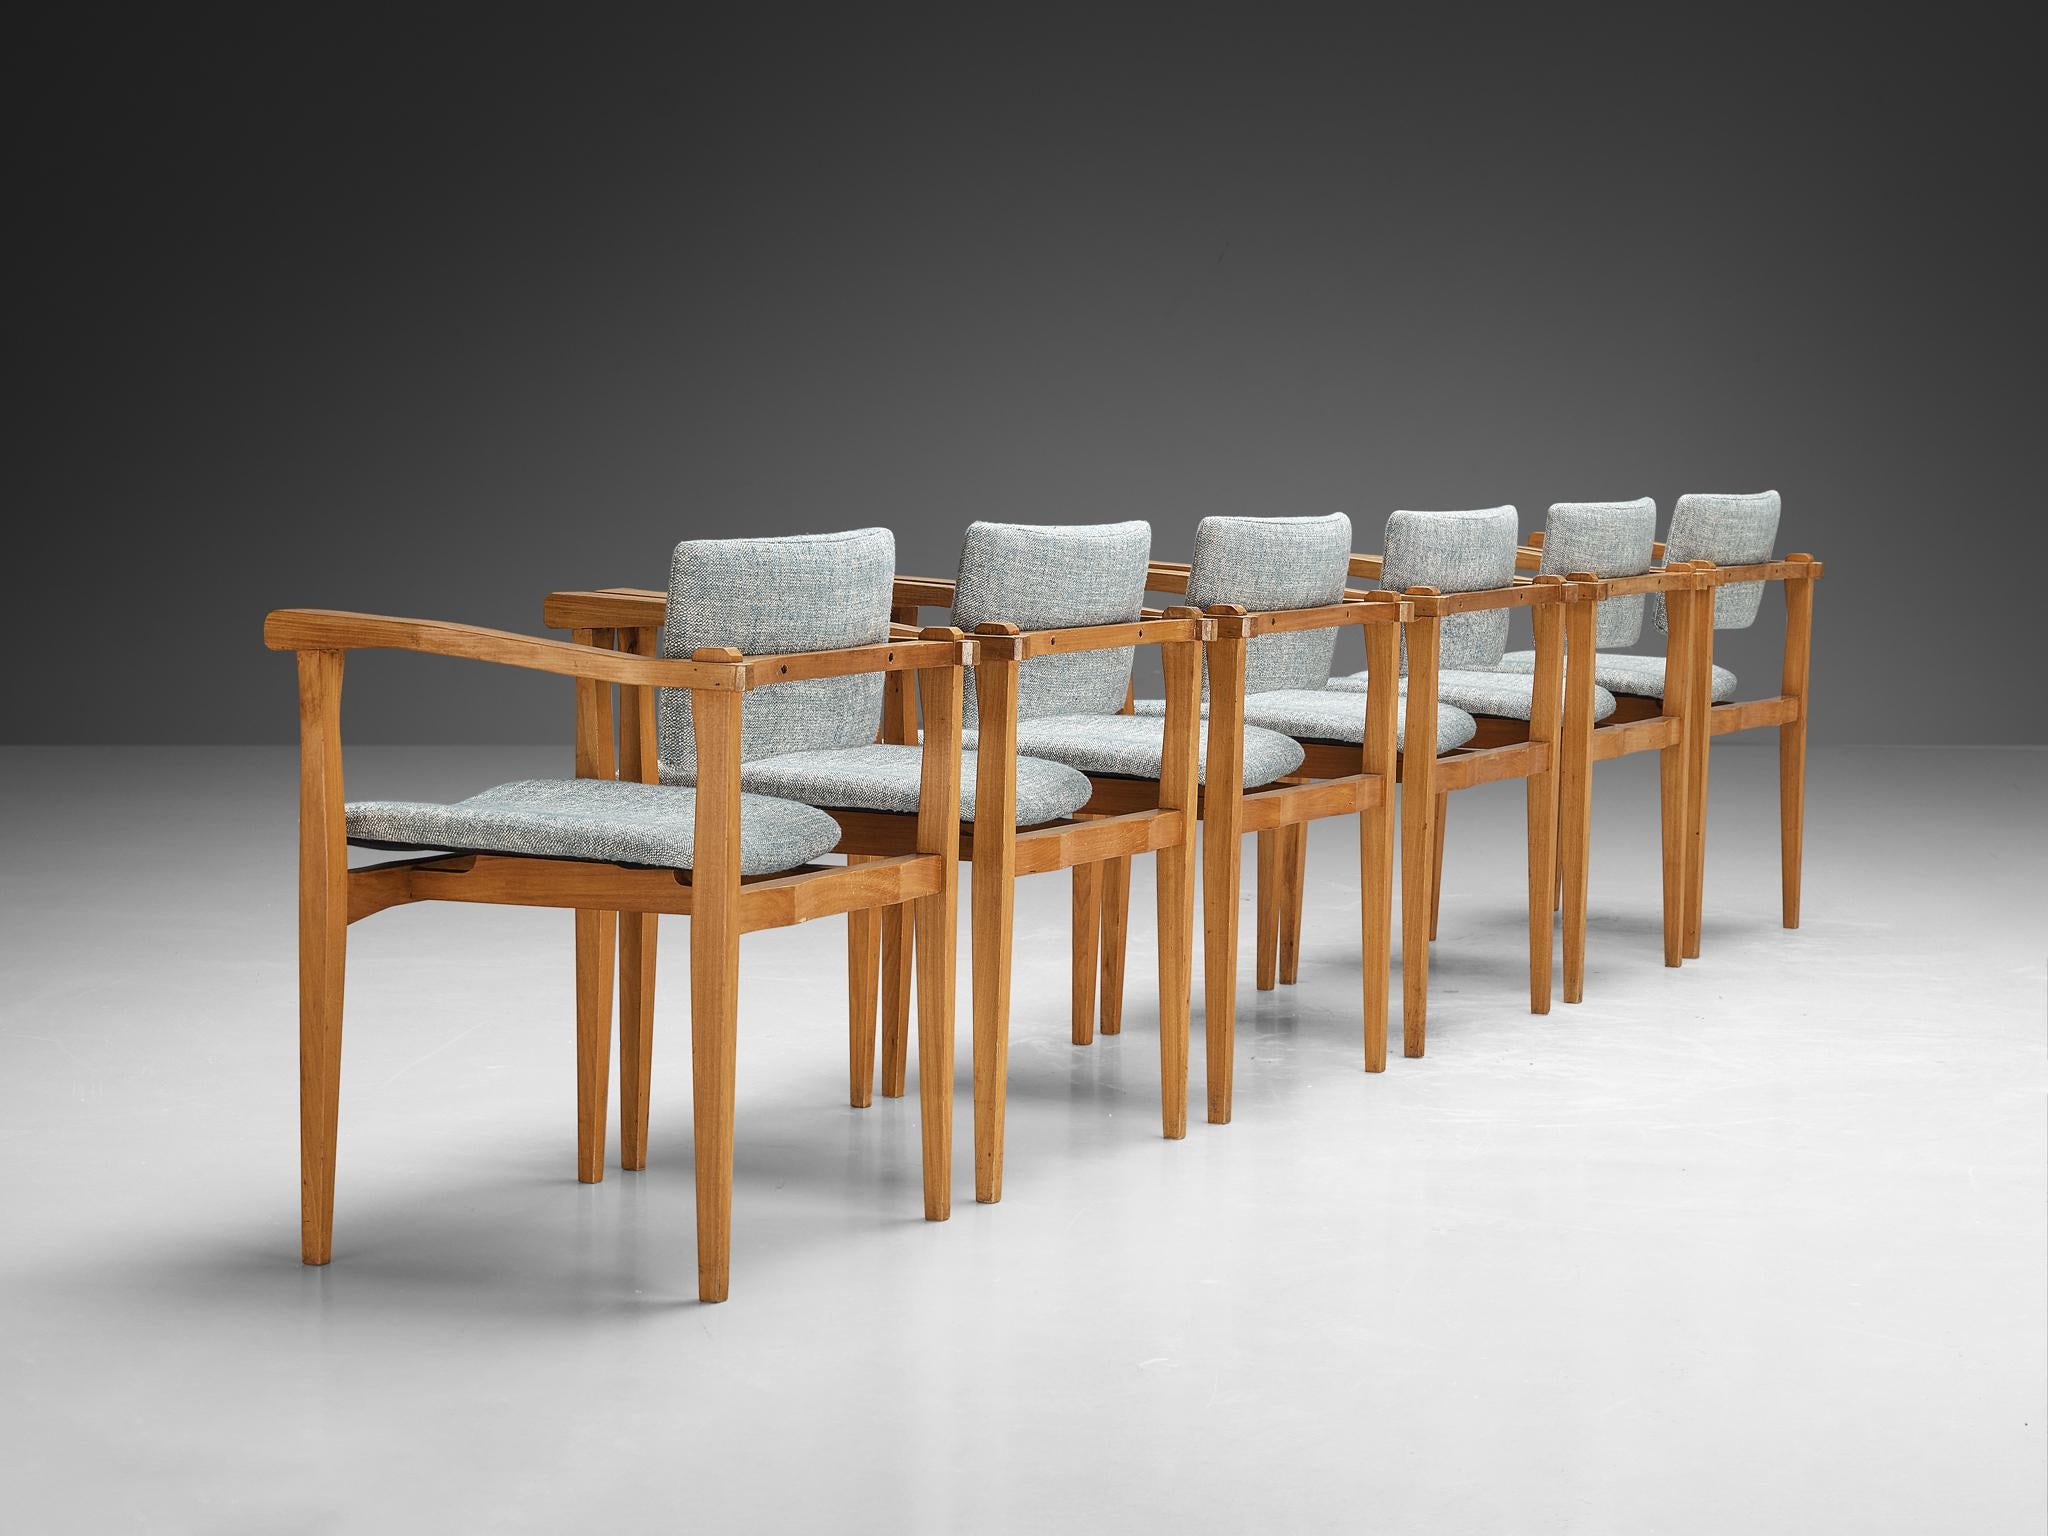 Italian Set of Six Armchairs in Walnut and Pierre Frey Upholstery